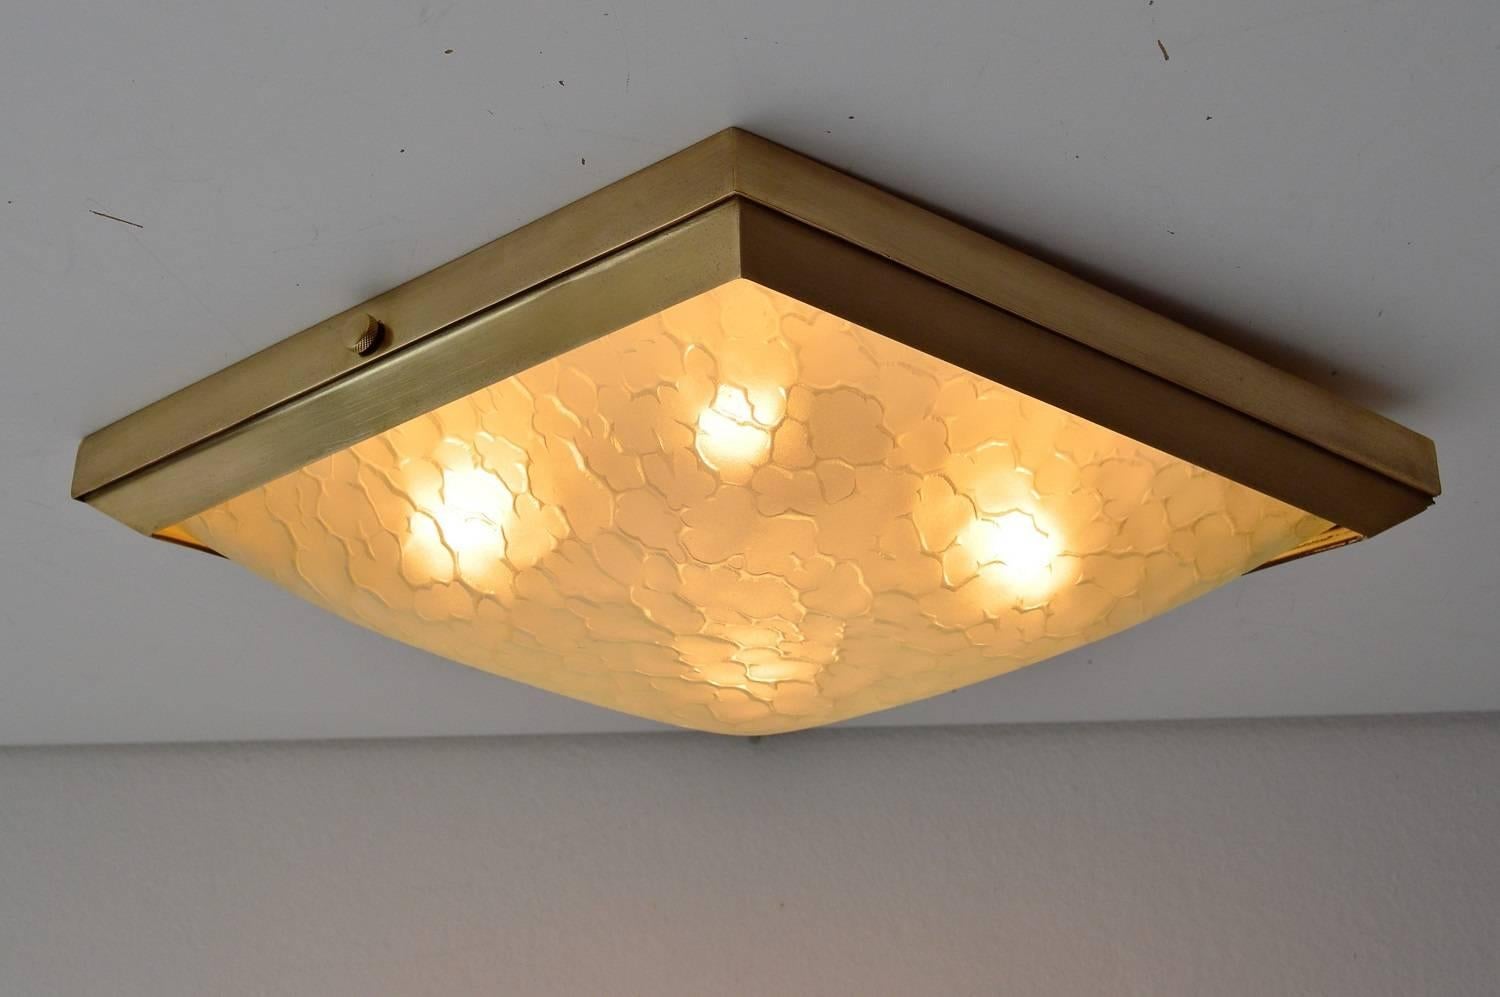 Gorgeous flush mount ceiling fixture or wall light in the form of a rhombus. Great design and craftsmanship.
Made in Italy by Fontana Arte in the 1950s.
The lamp's frame is made of thick, polished brass and can be opened with a hinge. The deeply